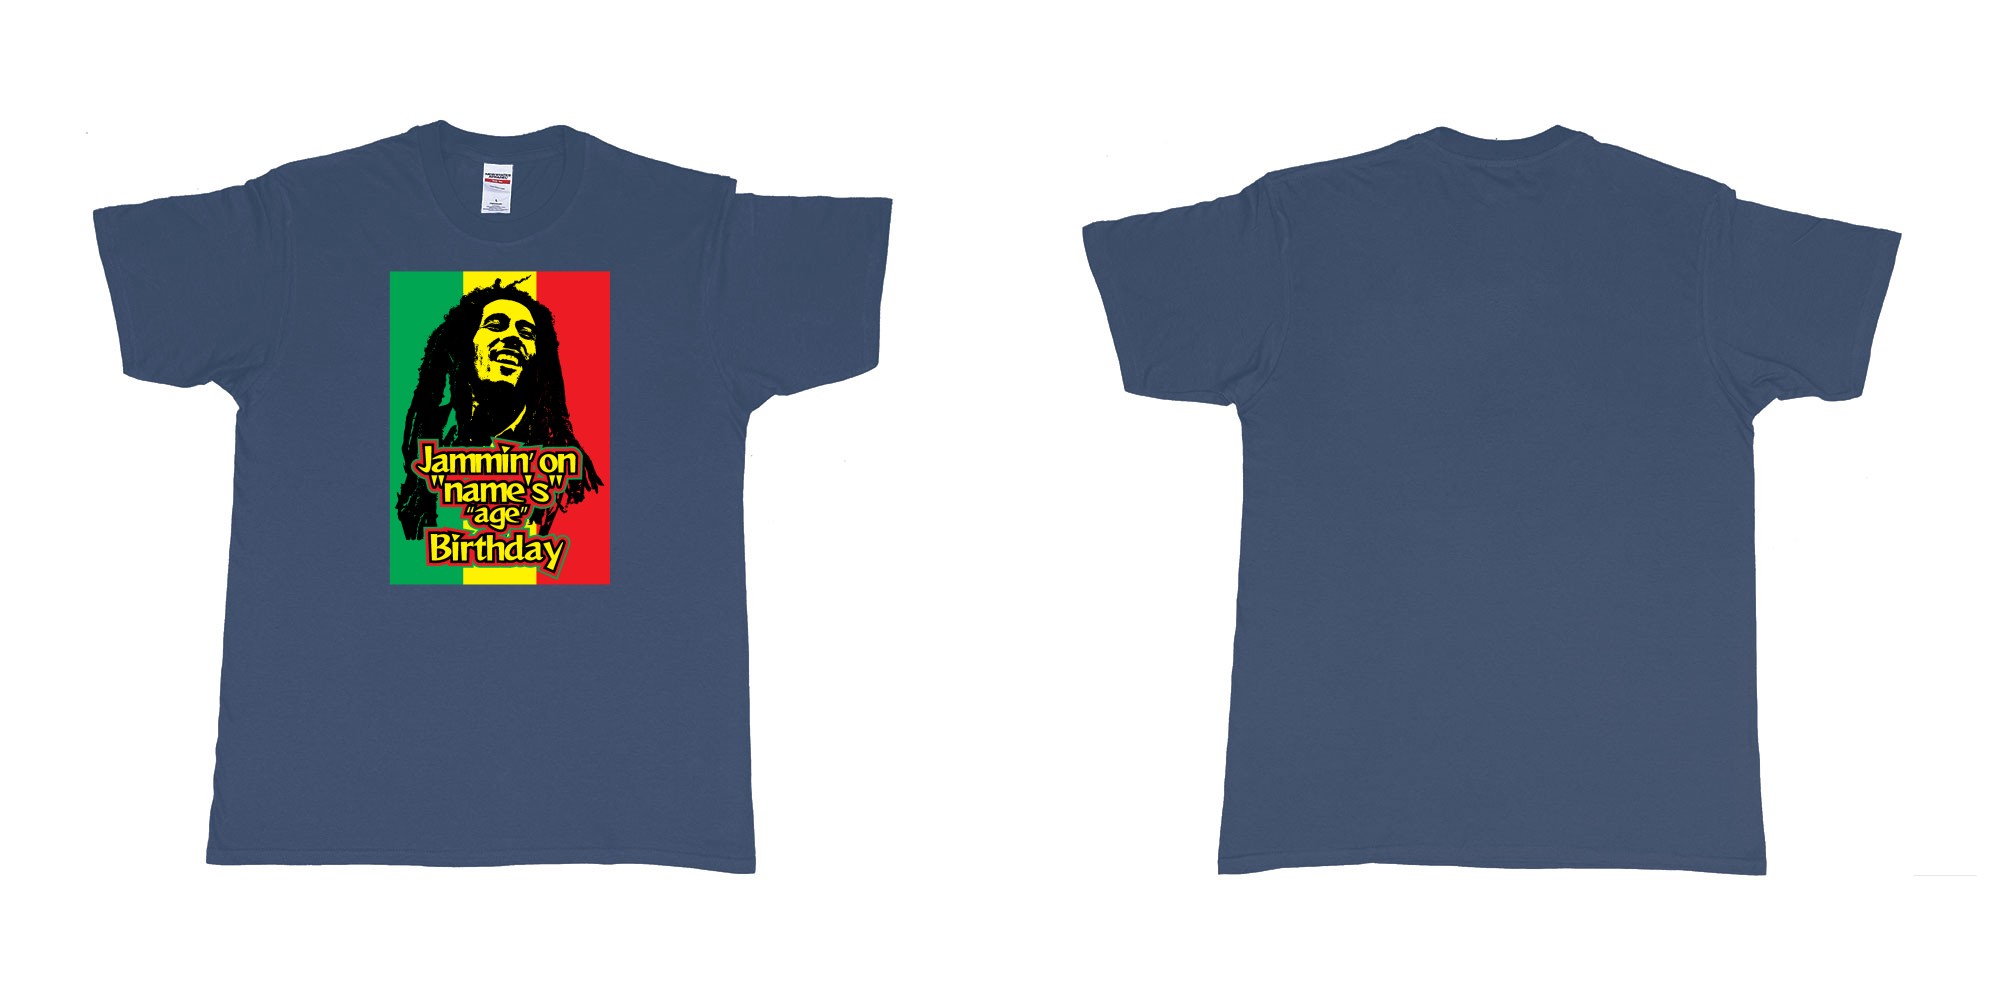 Custom tshirt design bob marley jammin on custom names birthday in fabric color navy choice your own text made in Bali by The Pirate Way